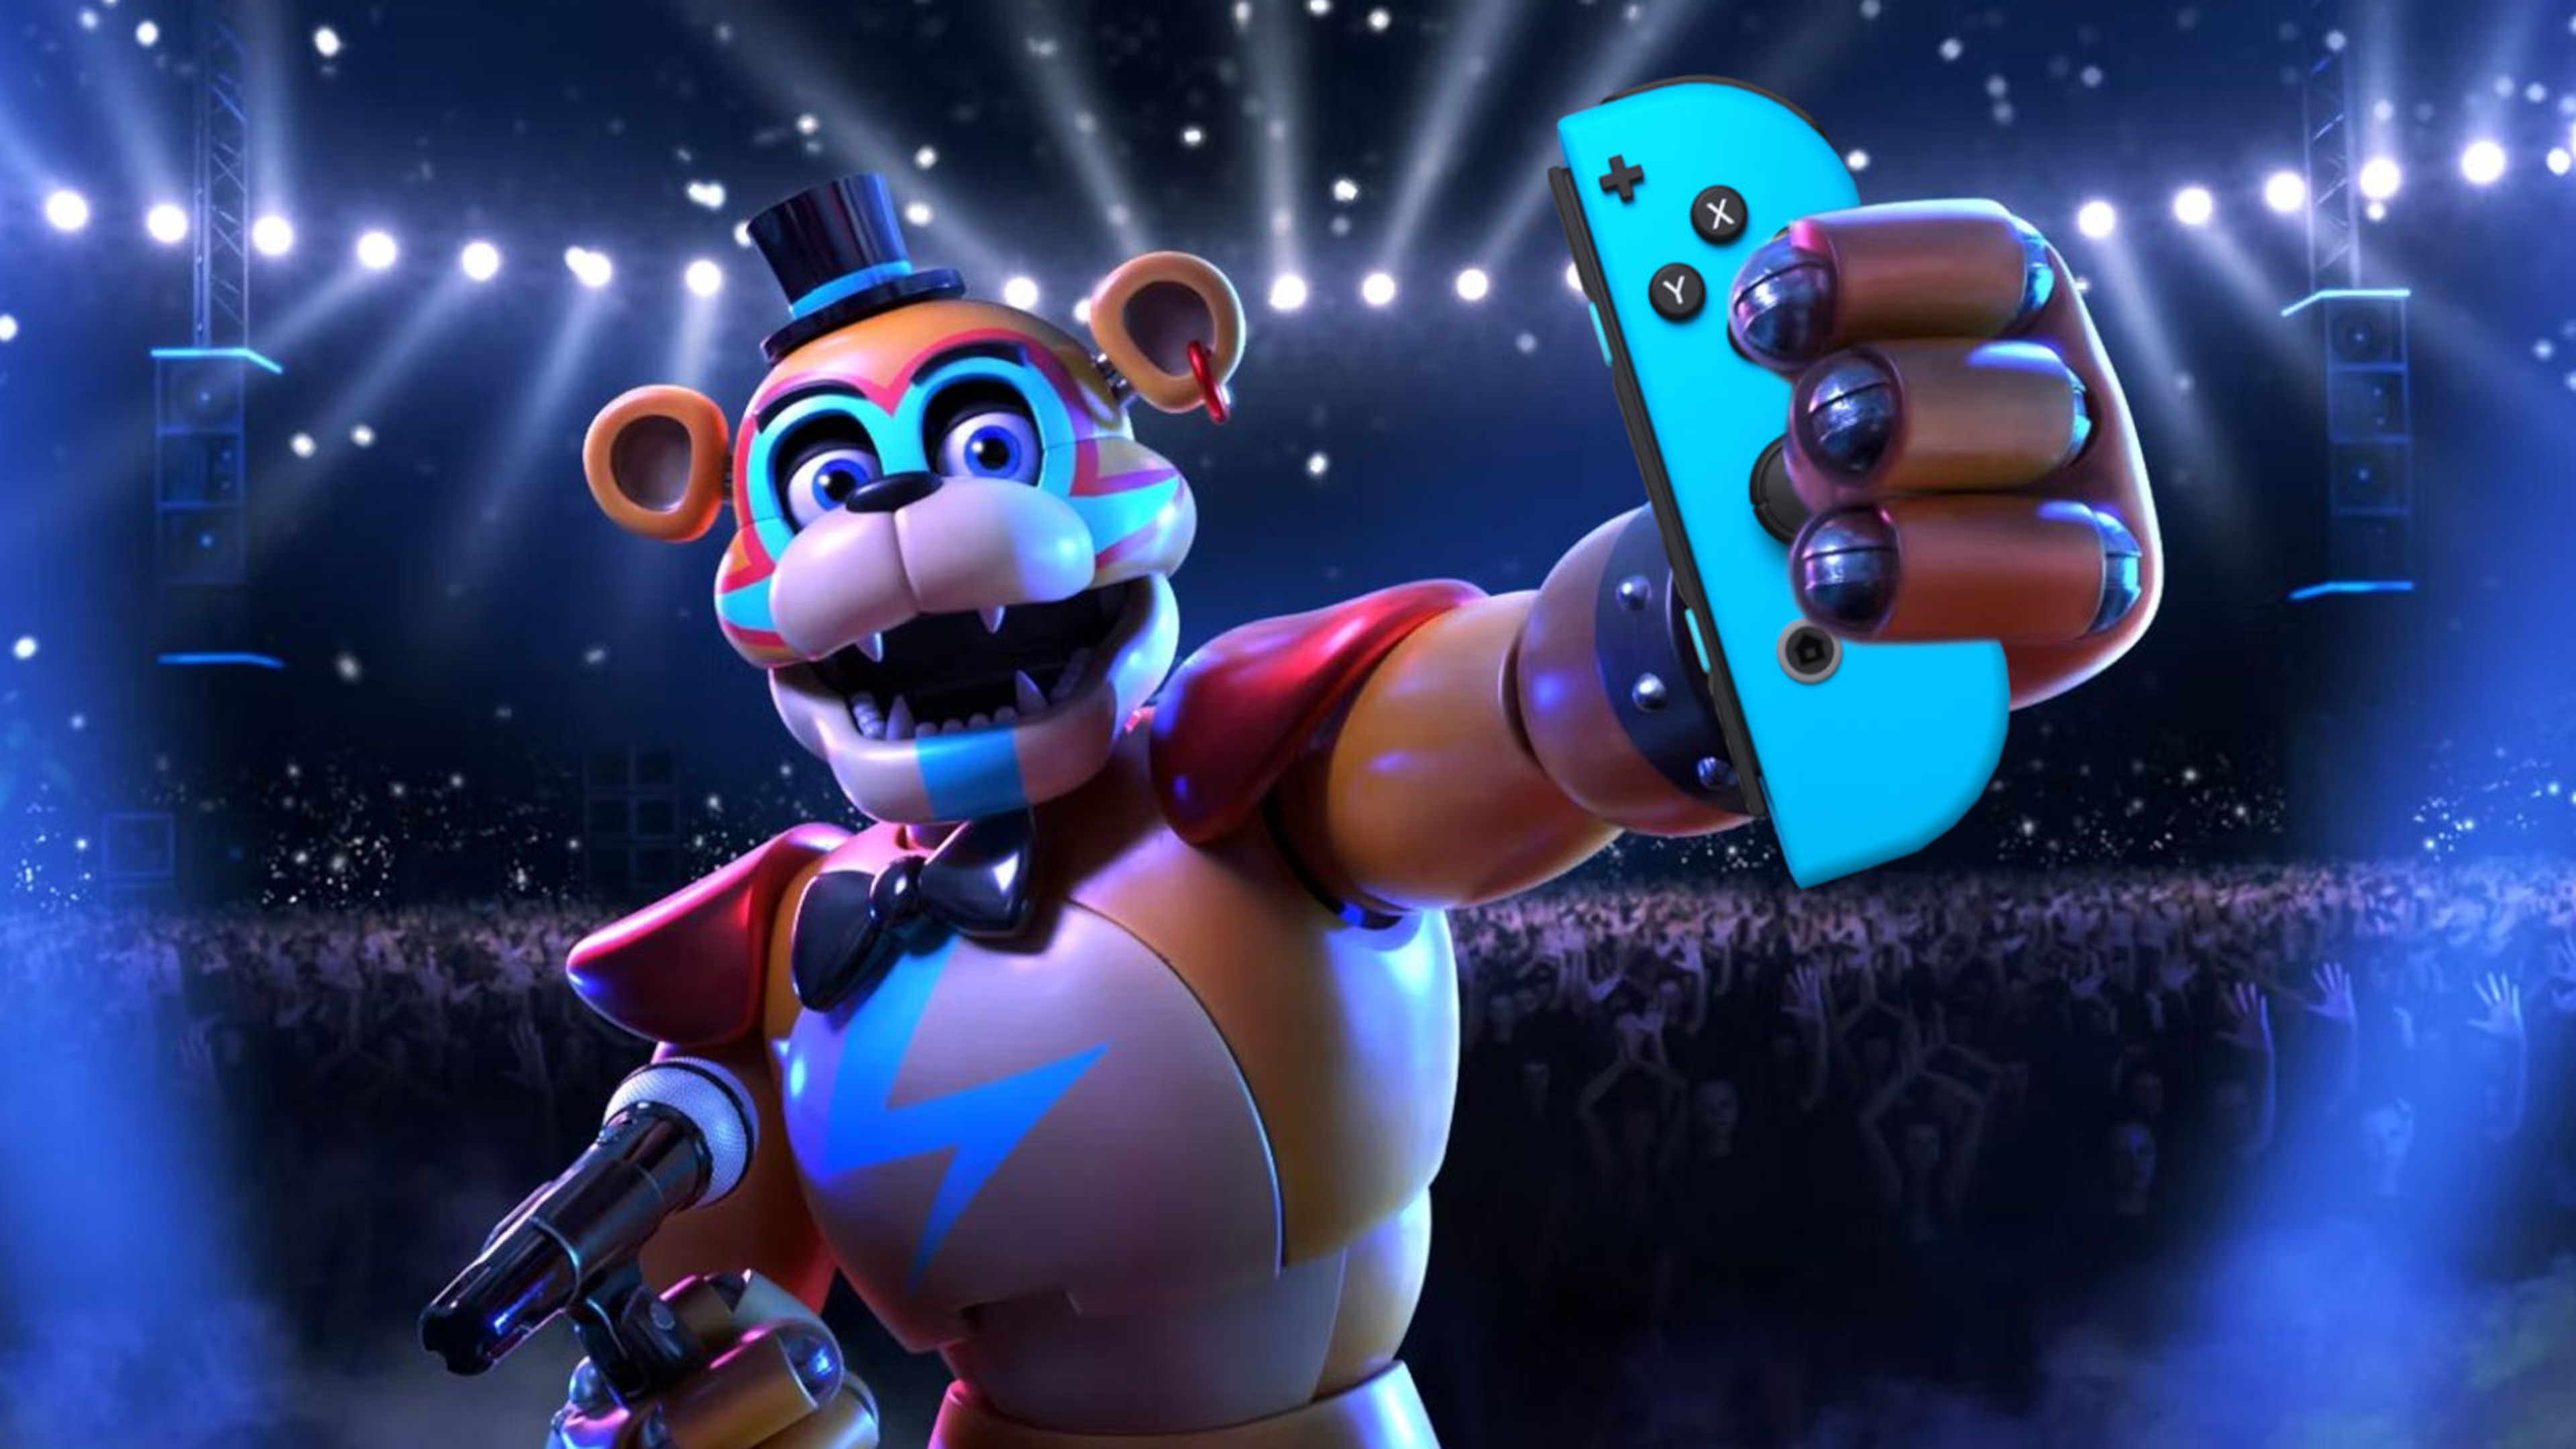 Five Nights At Freddy's Security Breach Revealed For PS5 - Game